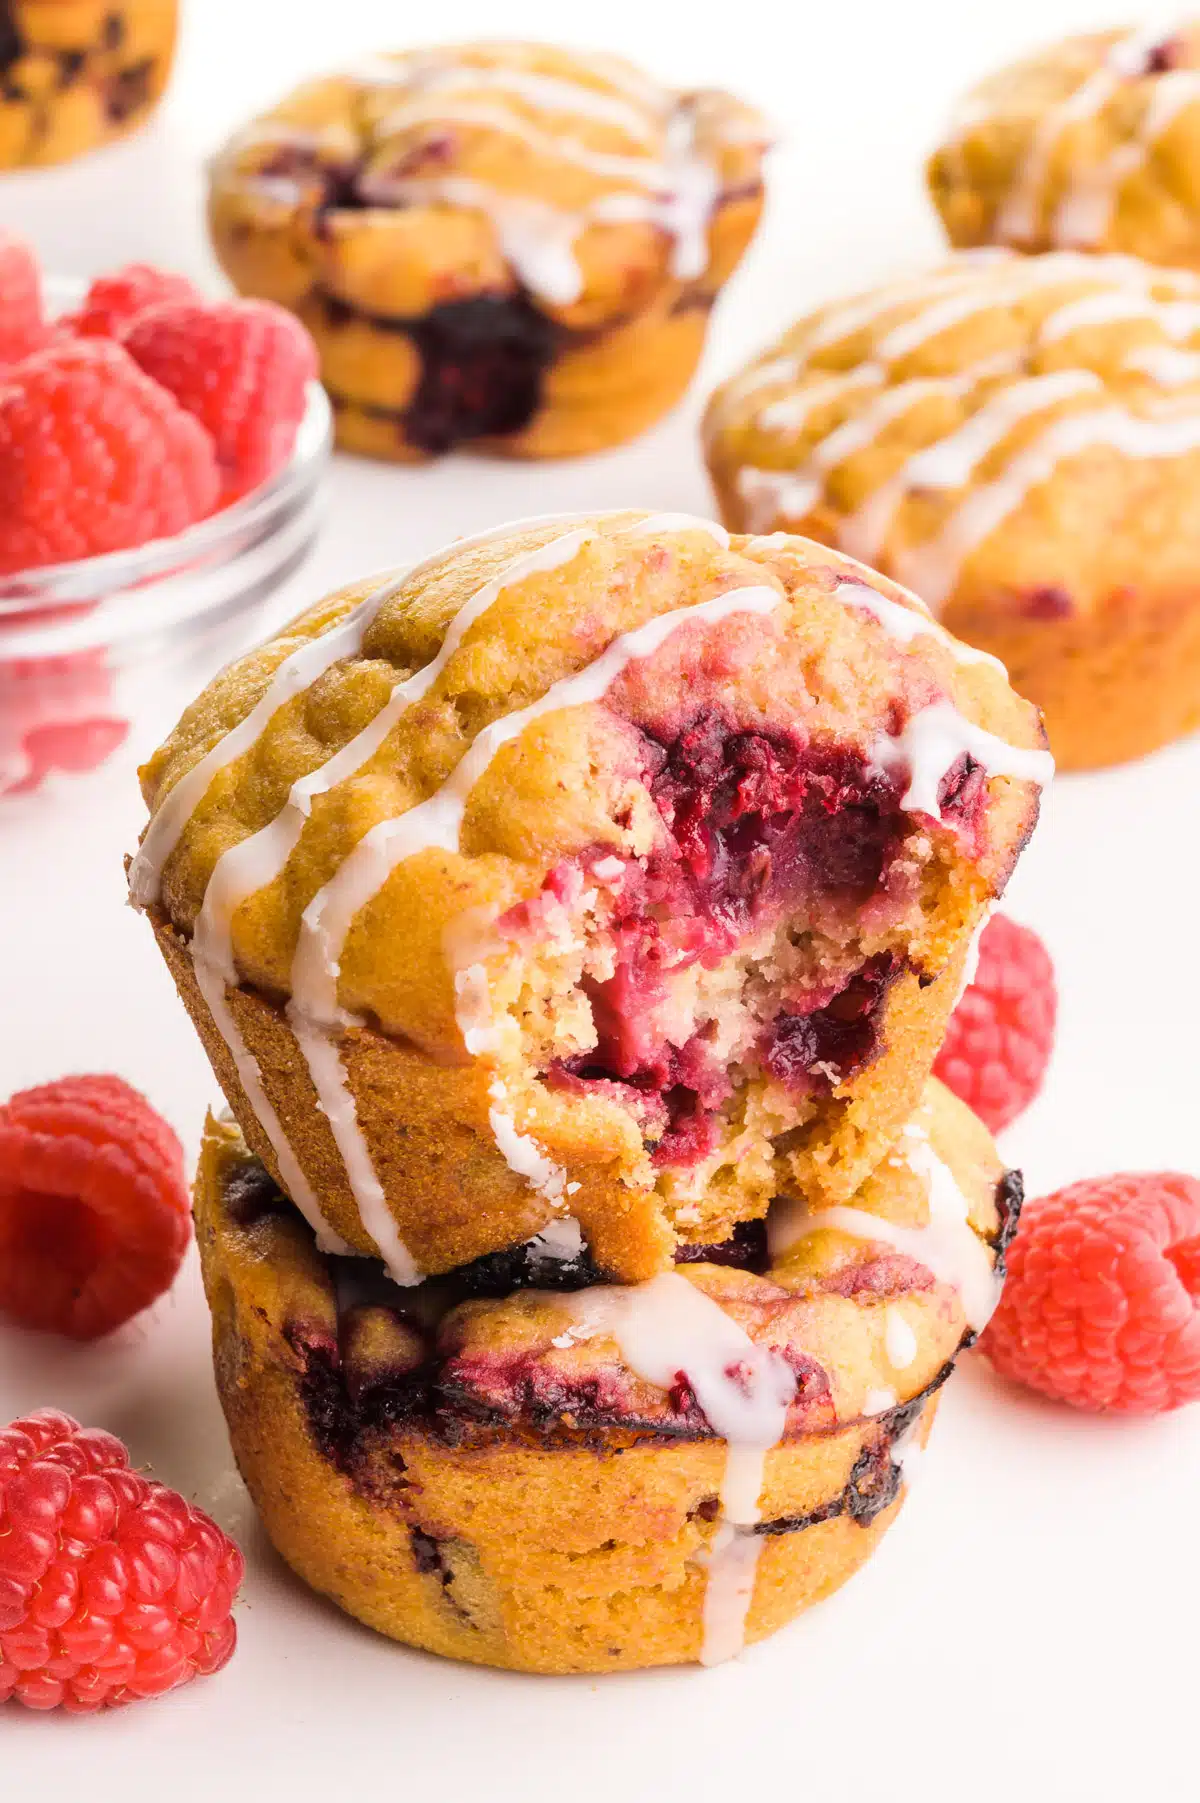 A stack of muffins shows the top one with a bite taken out. There are fresh raspberries and more muffins around it.